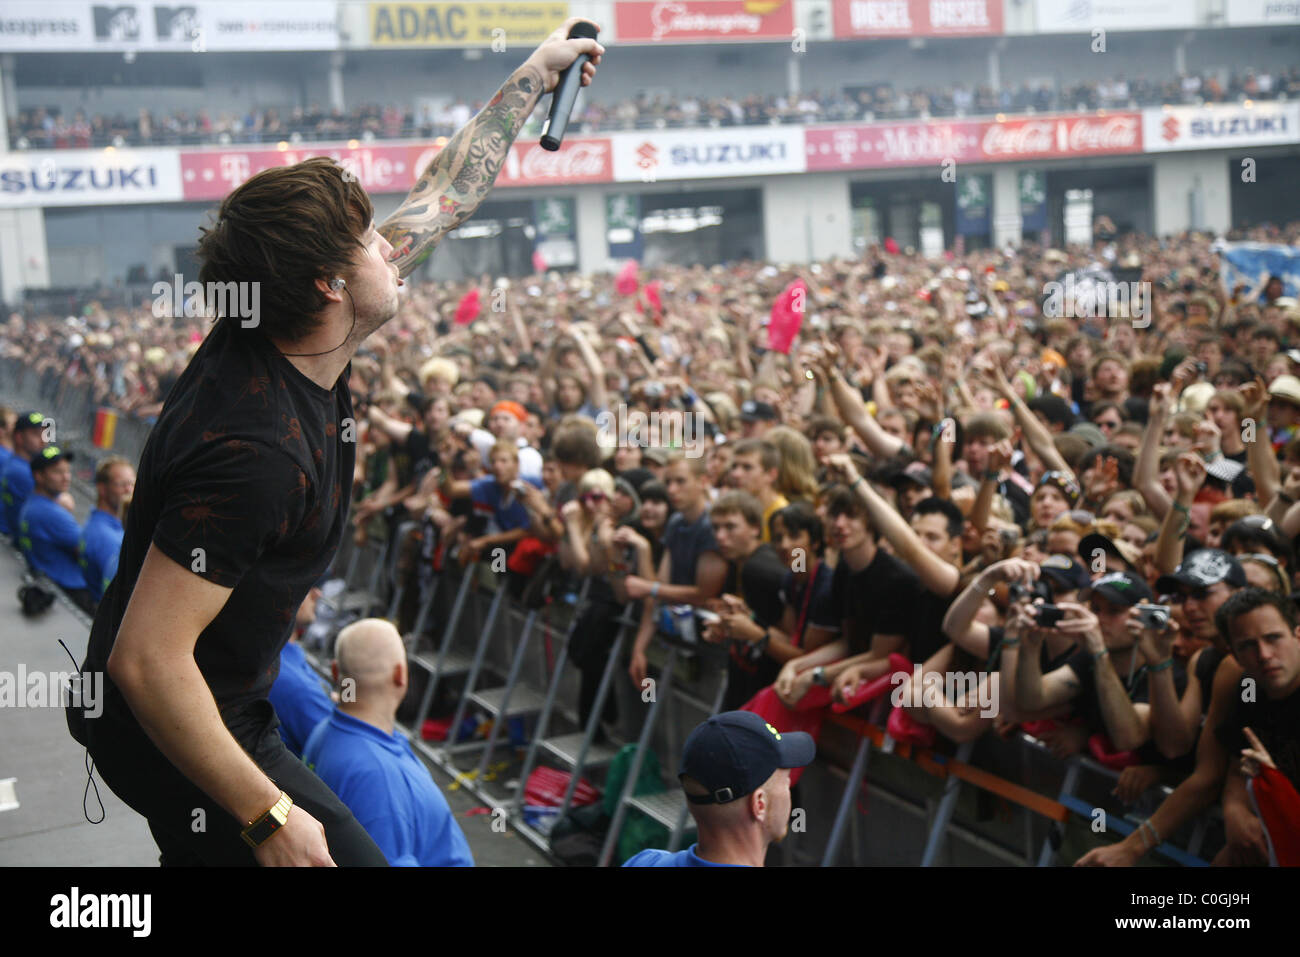 Simple Plan performing live at Rock am Ring 2008 Nuerburg, Germany -  08.04.08 Stock Photo - Alamy